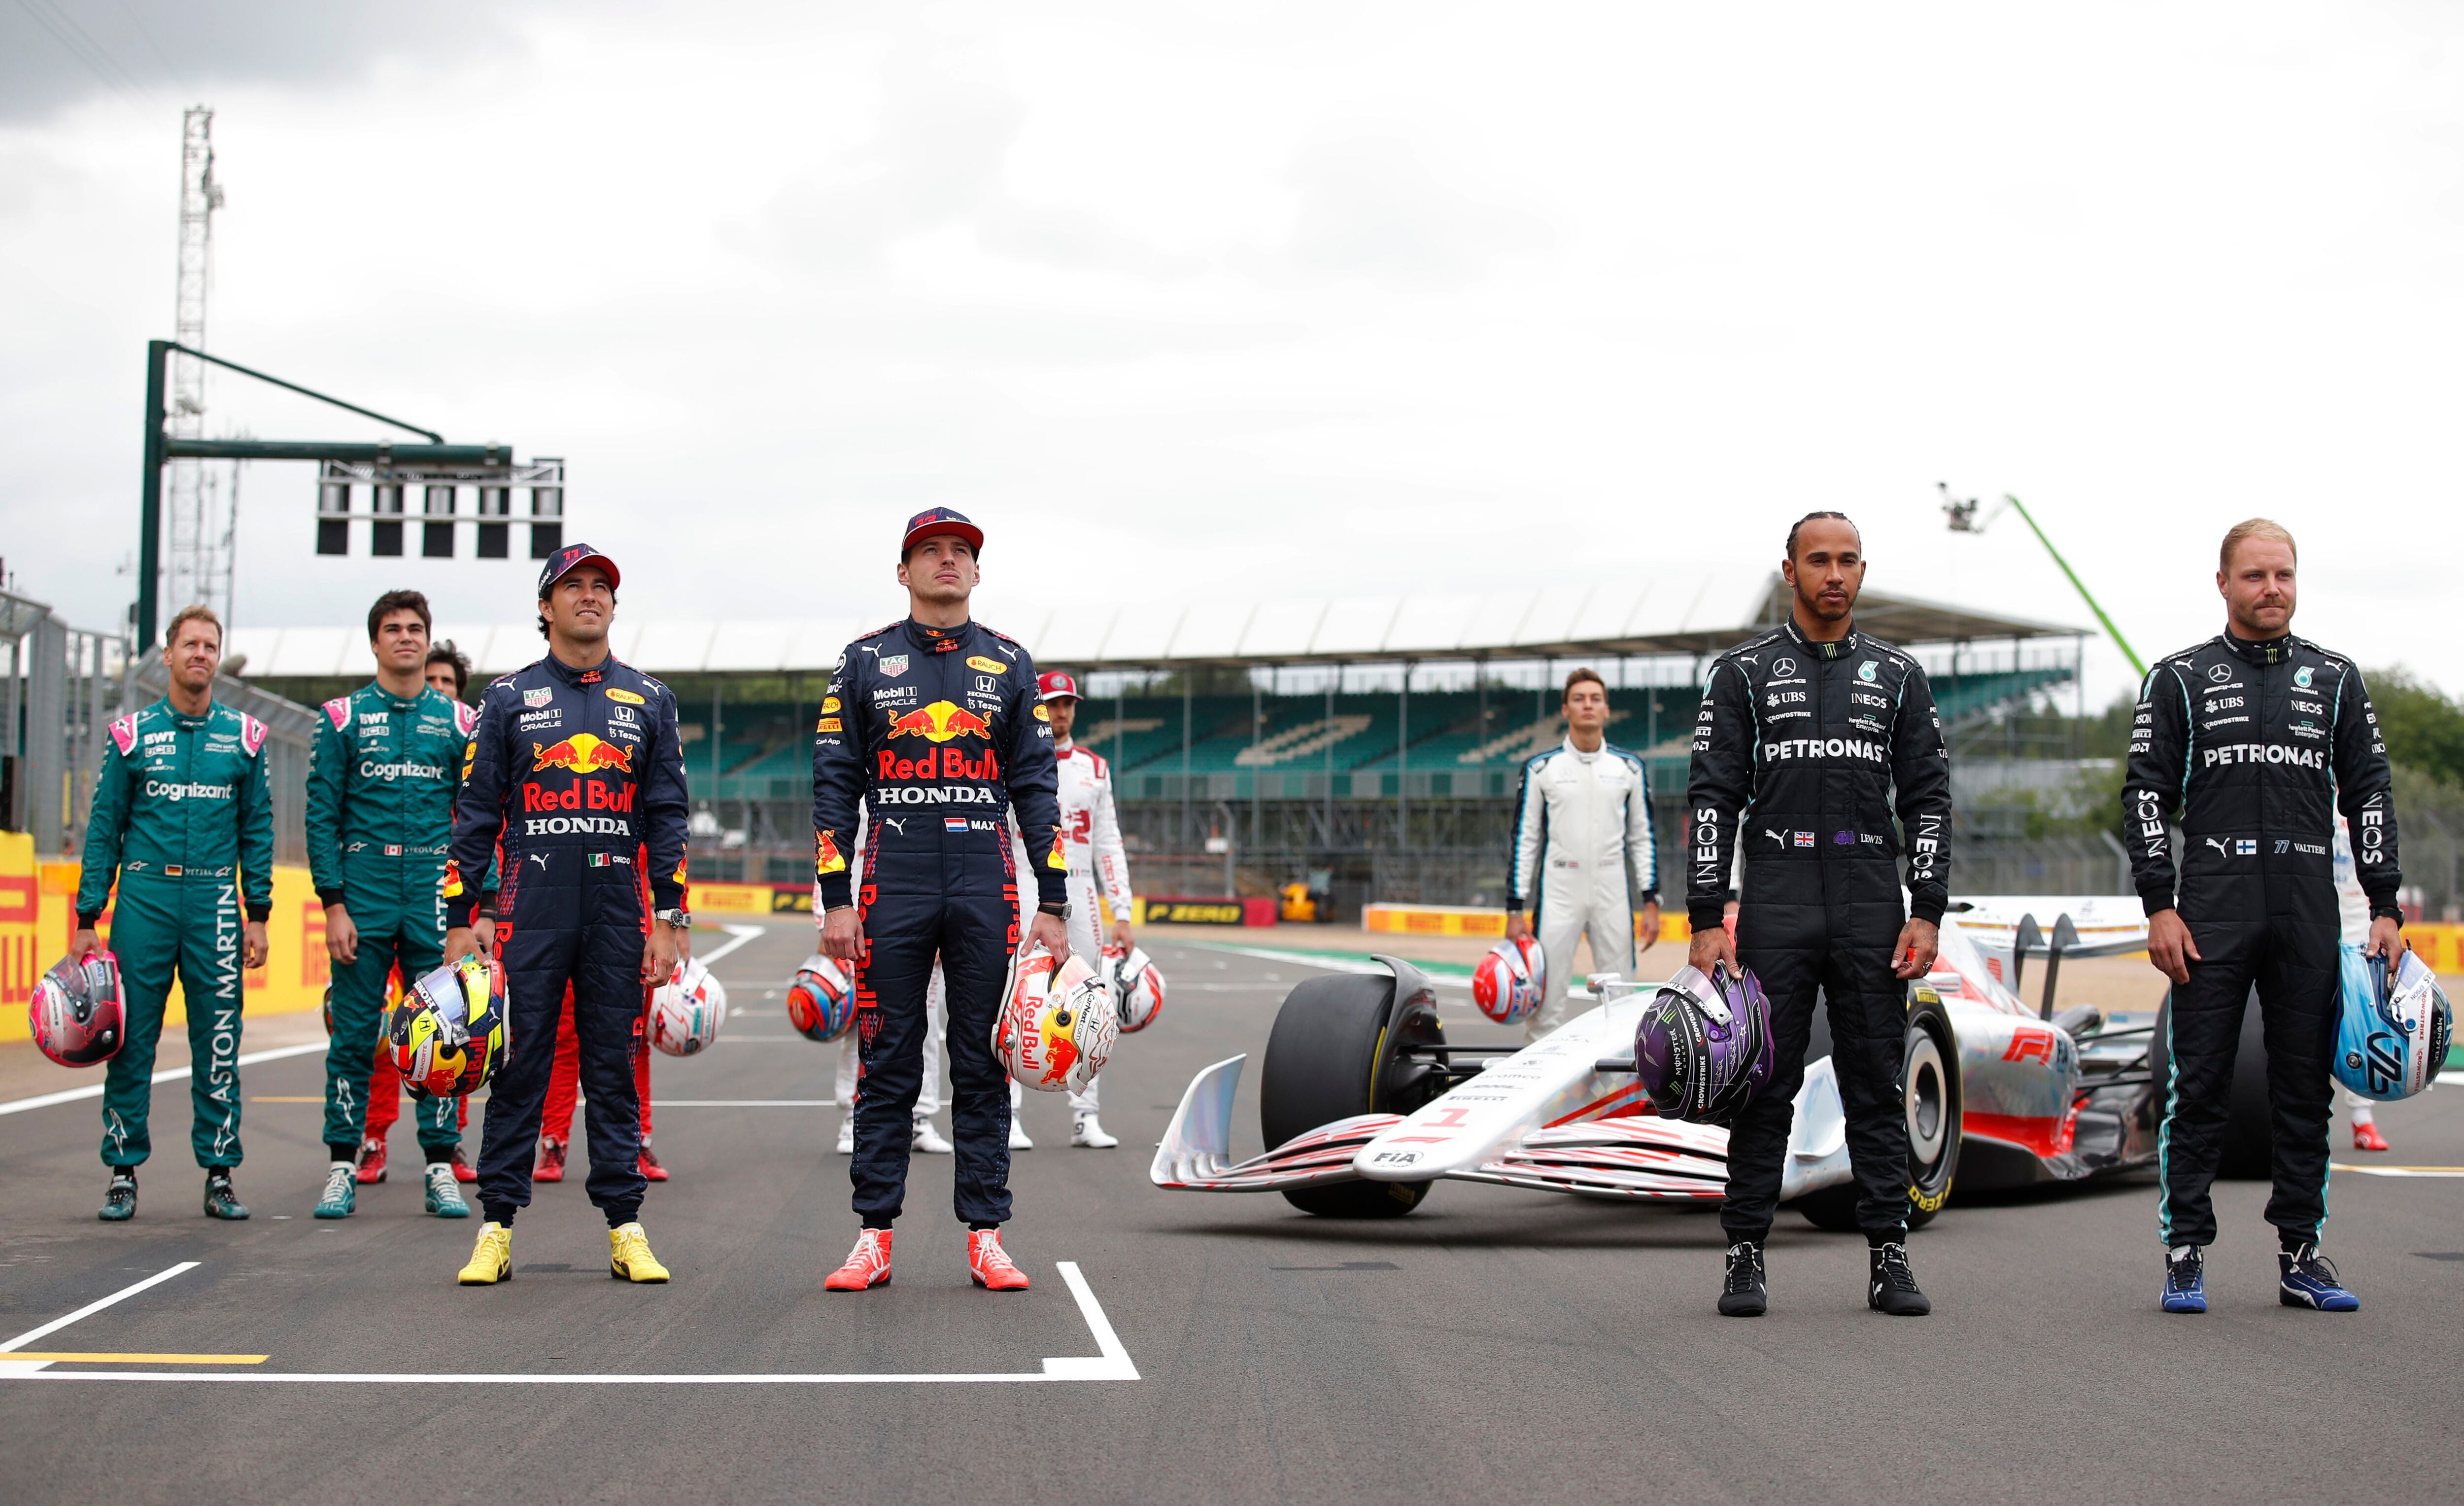 Formula One F1 - British Grand Prix - Silverstone Circuit, Silverstone, Britain - July 15, 2021 Mercedes' Lewis Hamilton and Valtteri Bottas, Red Bull's Max Verstappen and Sergio Perez and Aston Martin's Lance Stroll and Sebastian Vettel pose during a promotional photoshoot for the unveiling of the new 2022 F1 car REUTERS/Andrew Couldridge